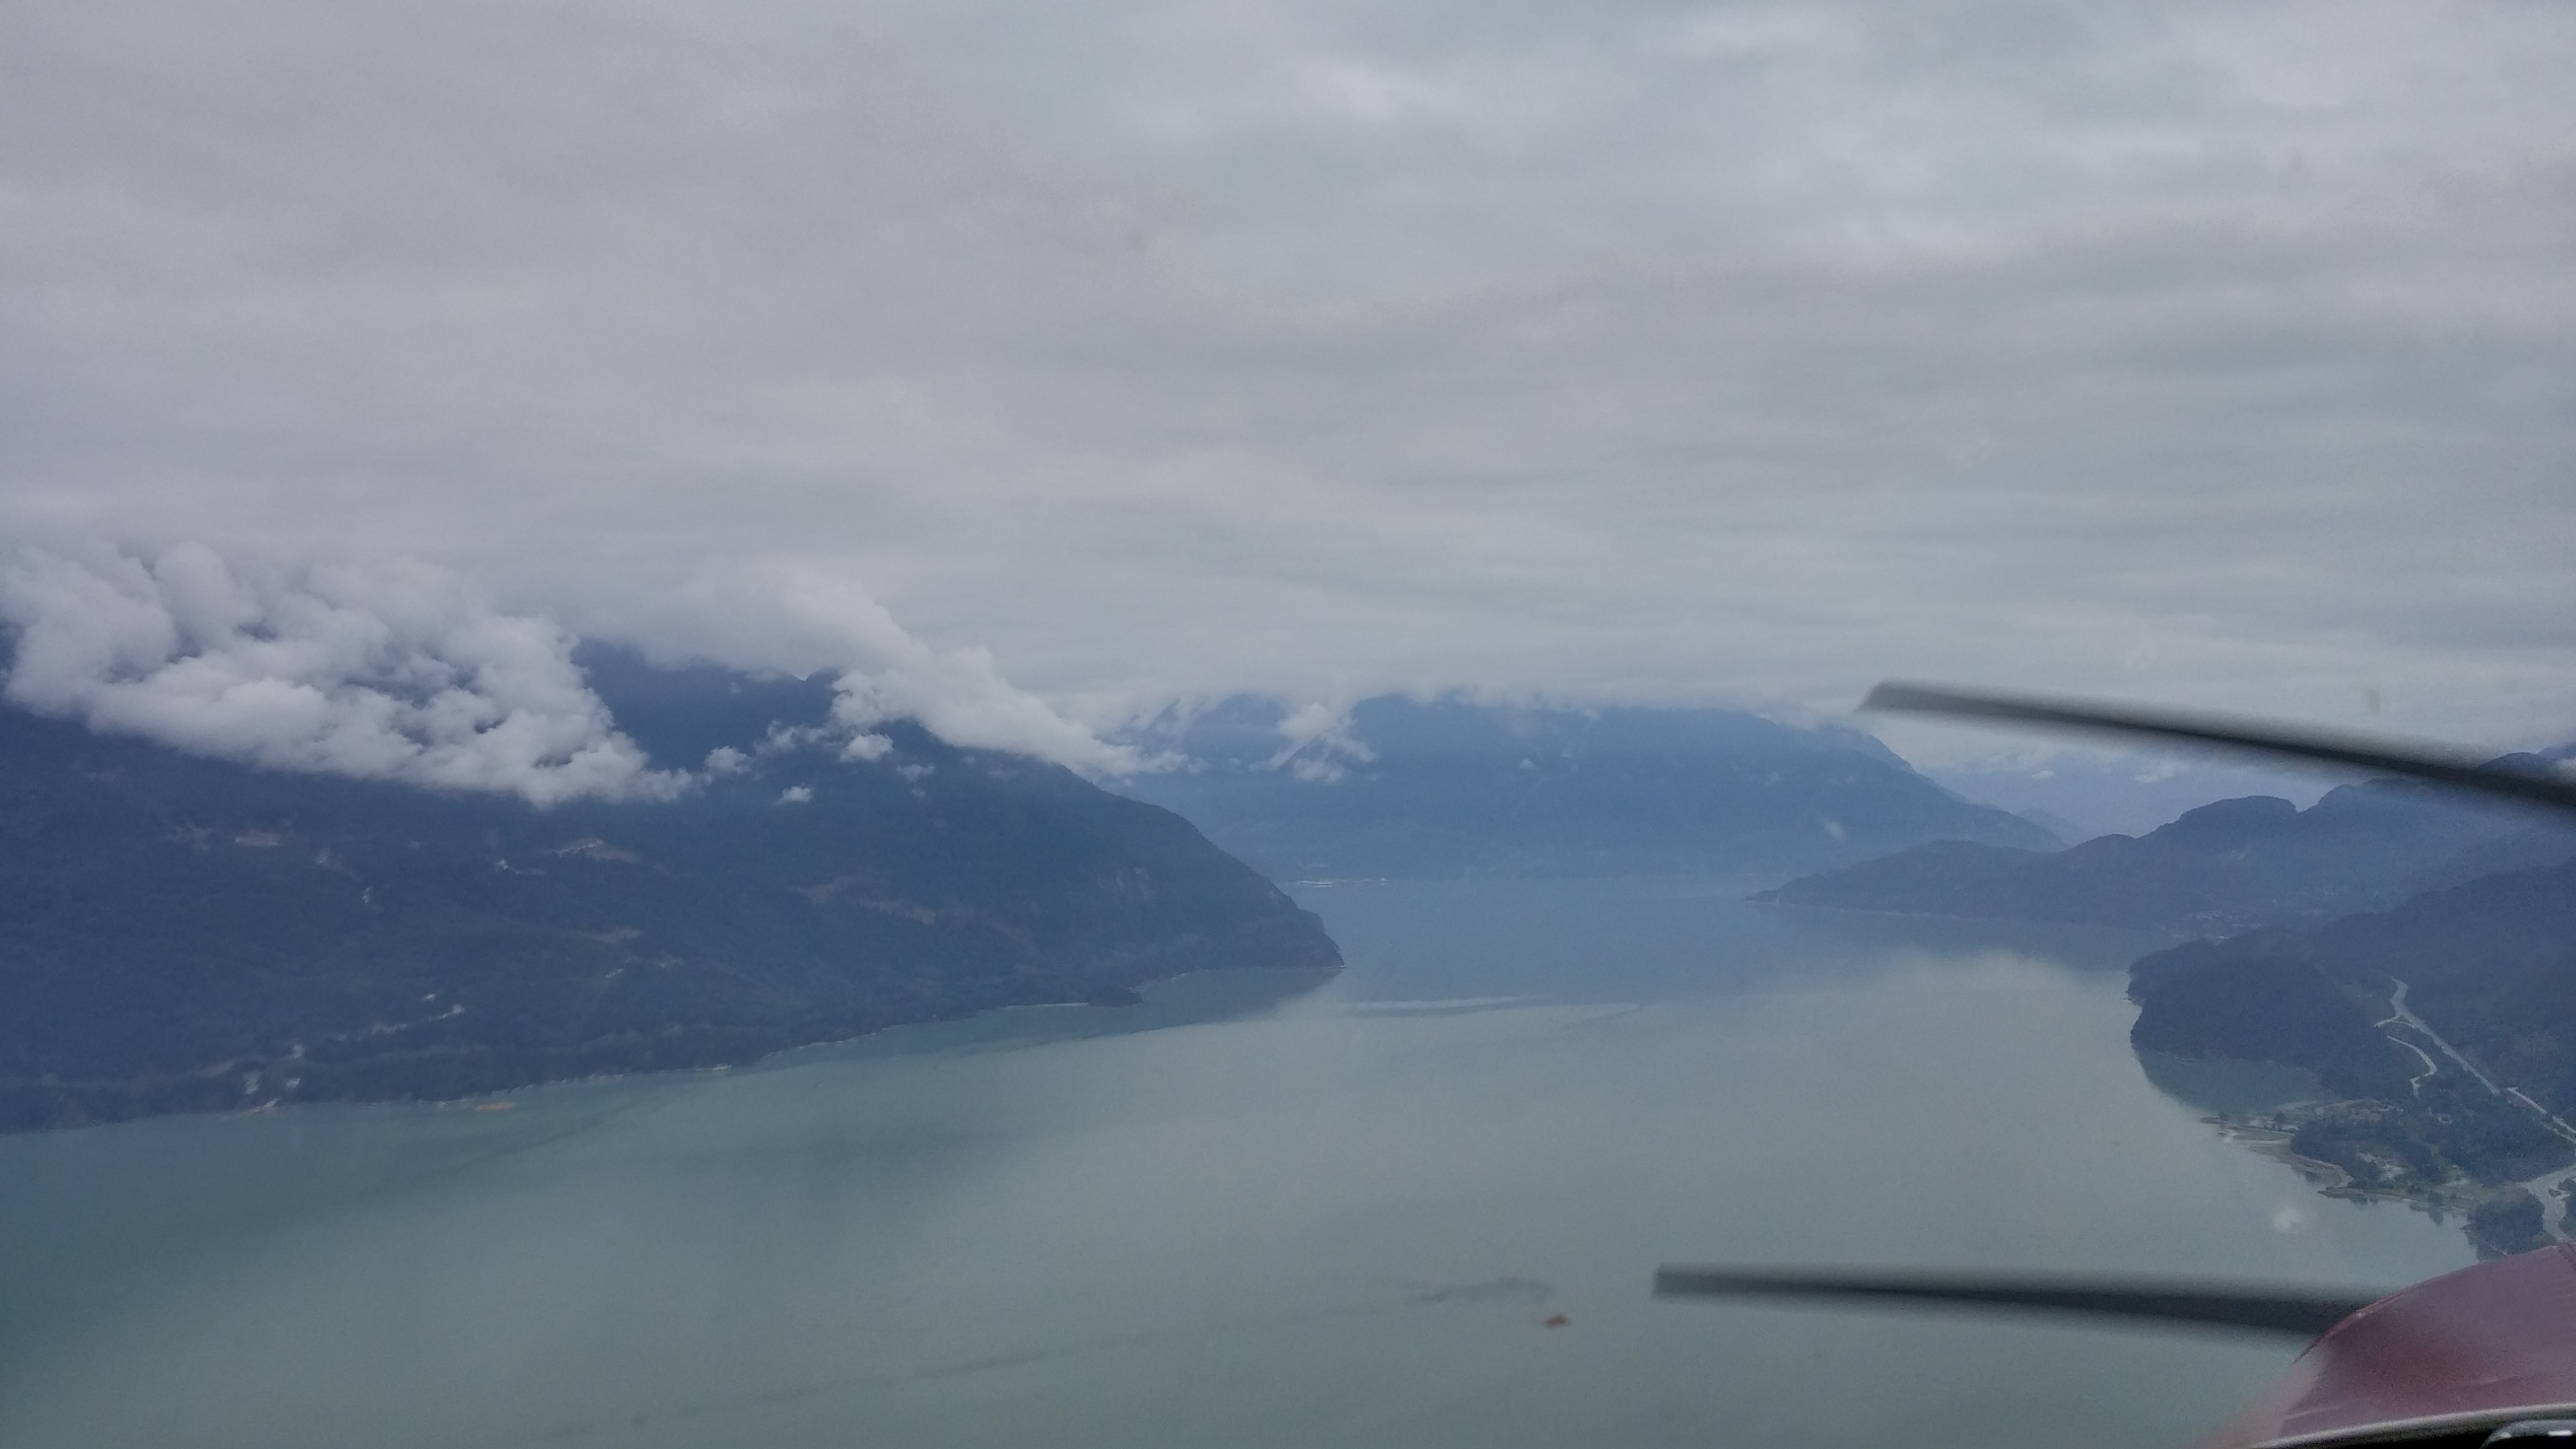 Looking north up the Howe Sound